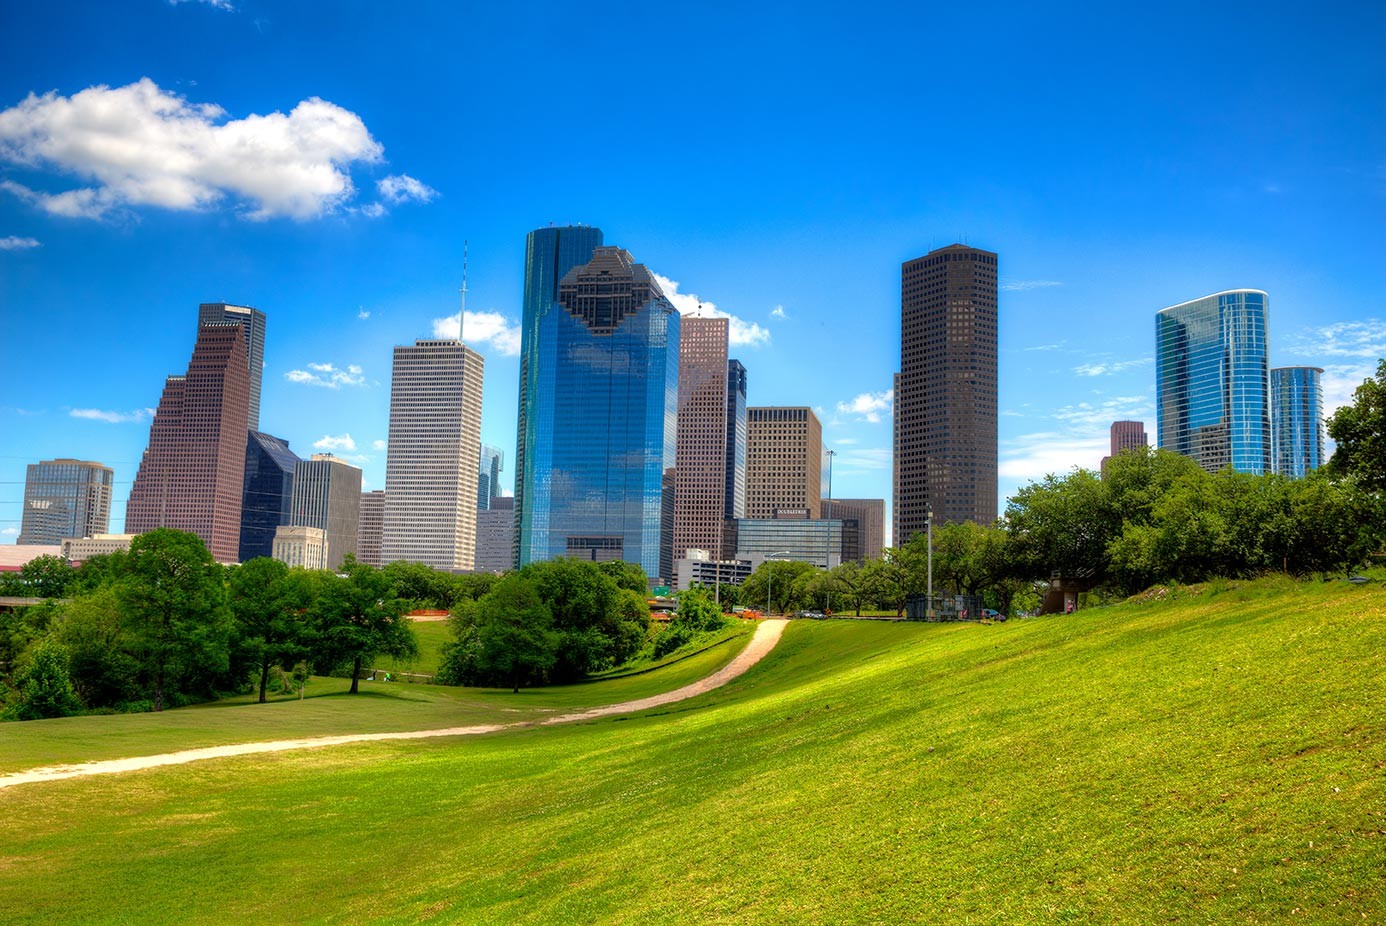 All-Star Connections is a recruitment agency in Houston that provides high-quality candidates for companies in engineering & technical industries.